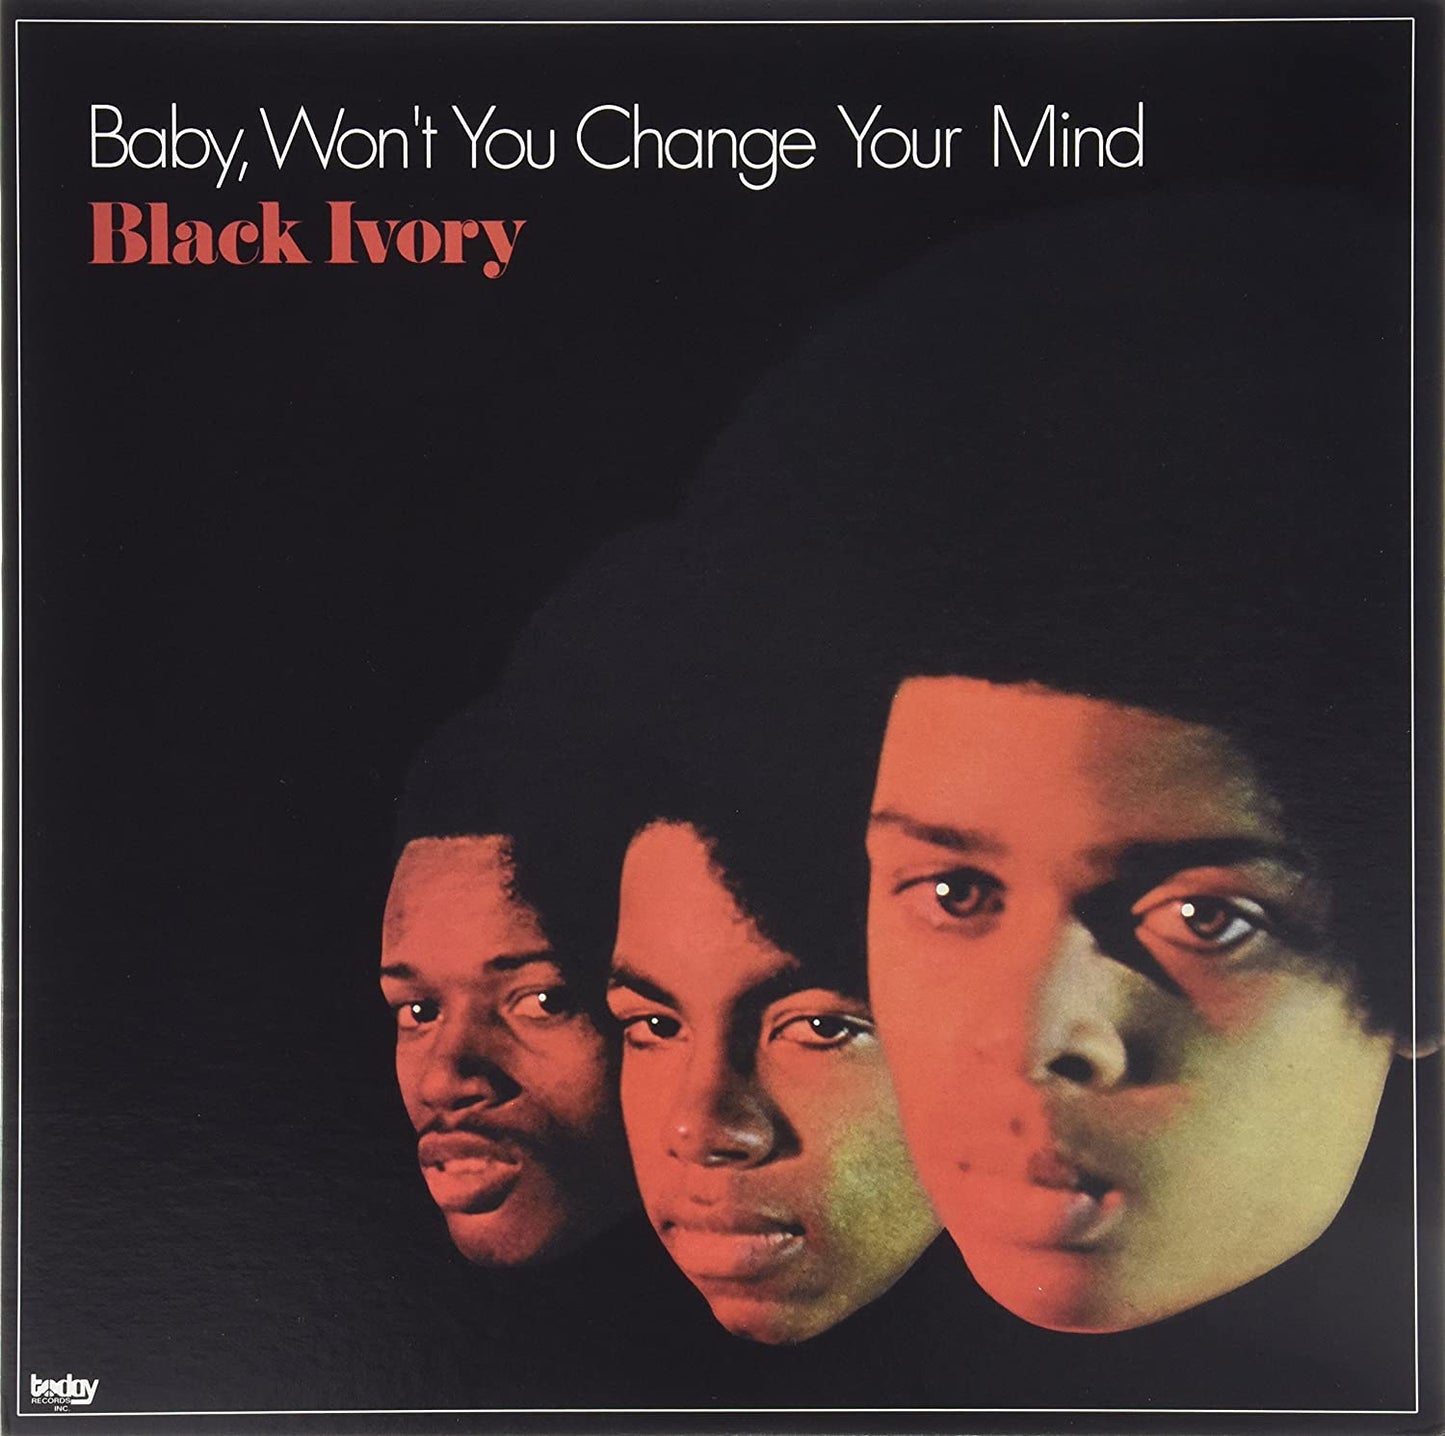 Black Ivory/Baby, Won't You Change Your Mind [LP]